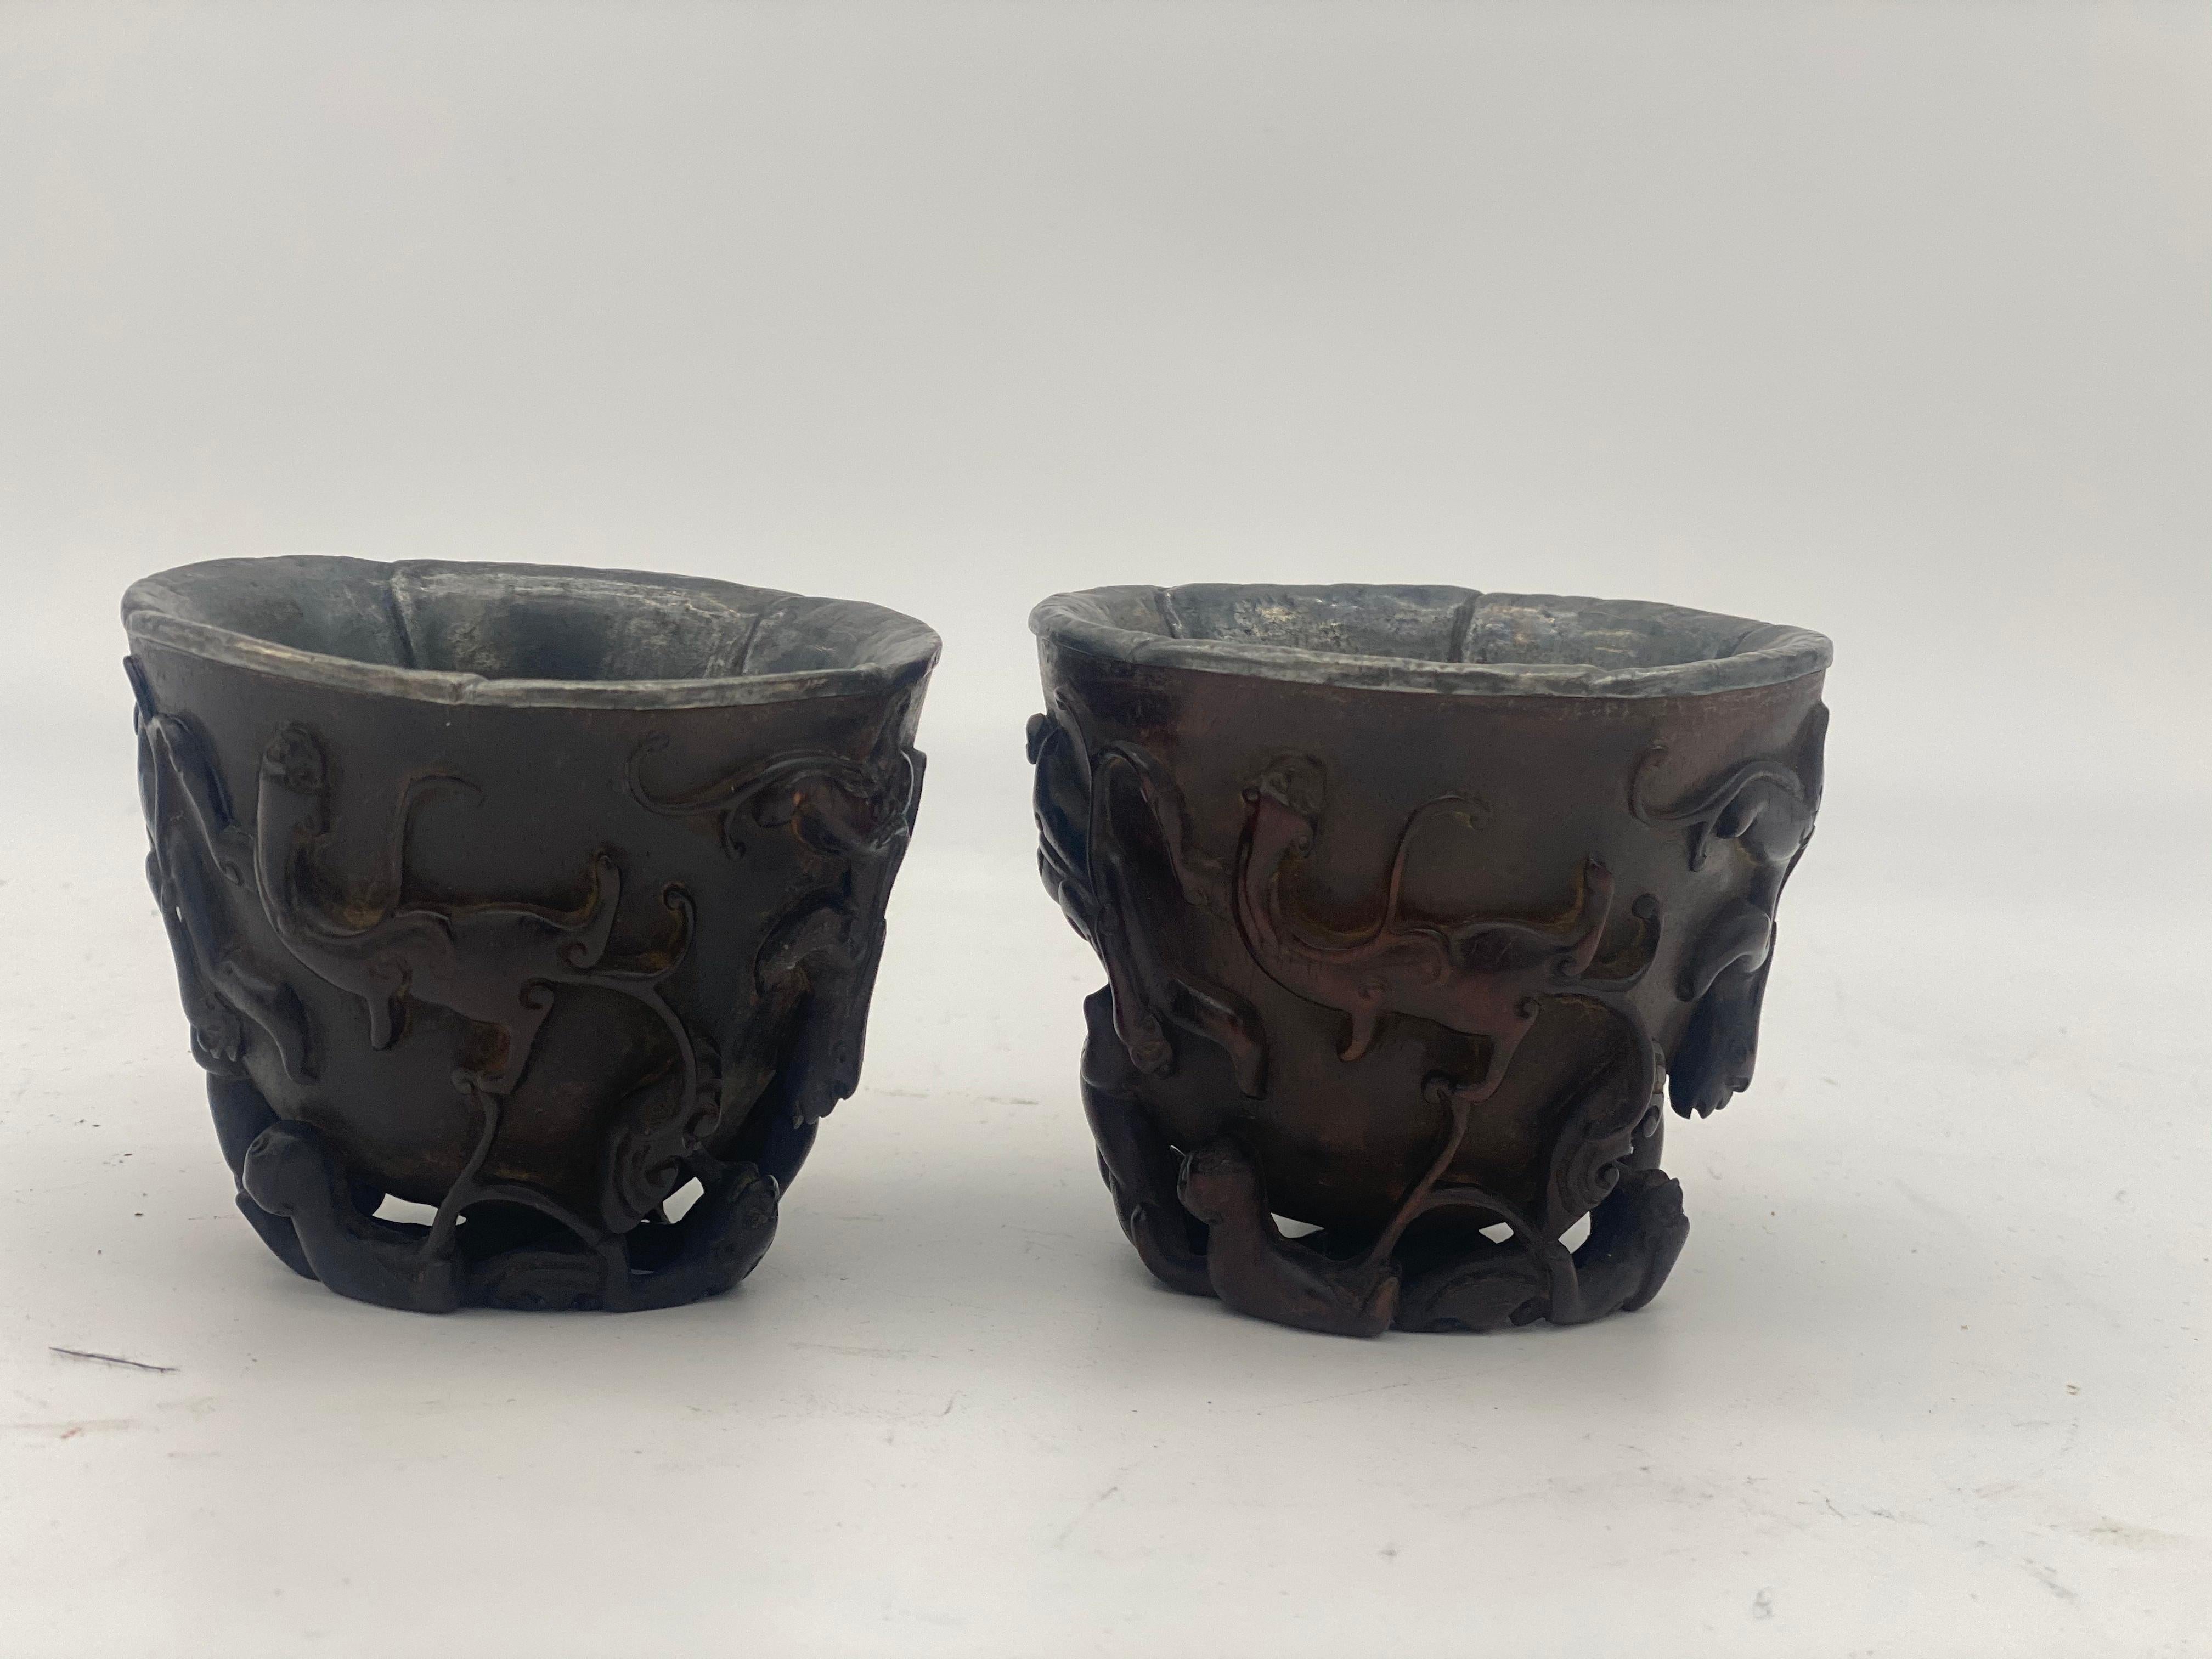 17th century a pair of Ming dynasty Chinese ZiTan inlaid silver cups, the exterior carved in high relief and undercut around the sides and base with Chi dragon, 5 edges with silver lining, dimensions: 8.5cm x 7.2cm high.